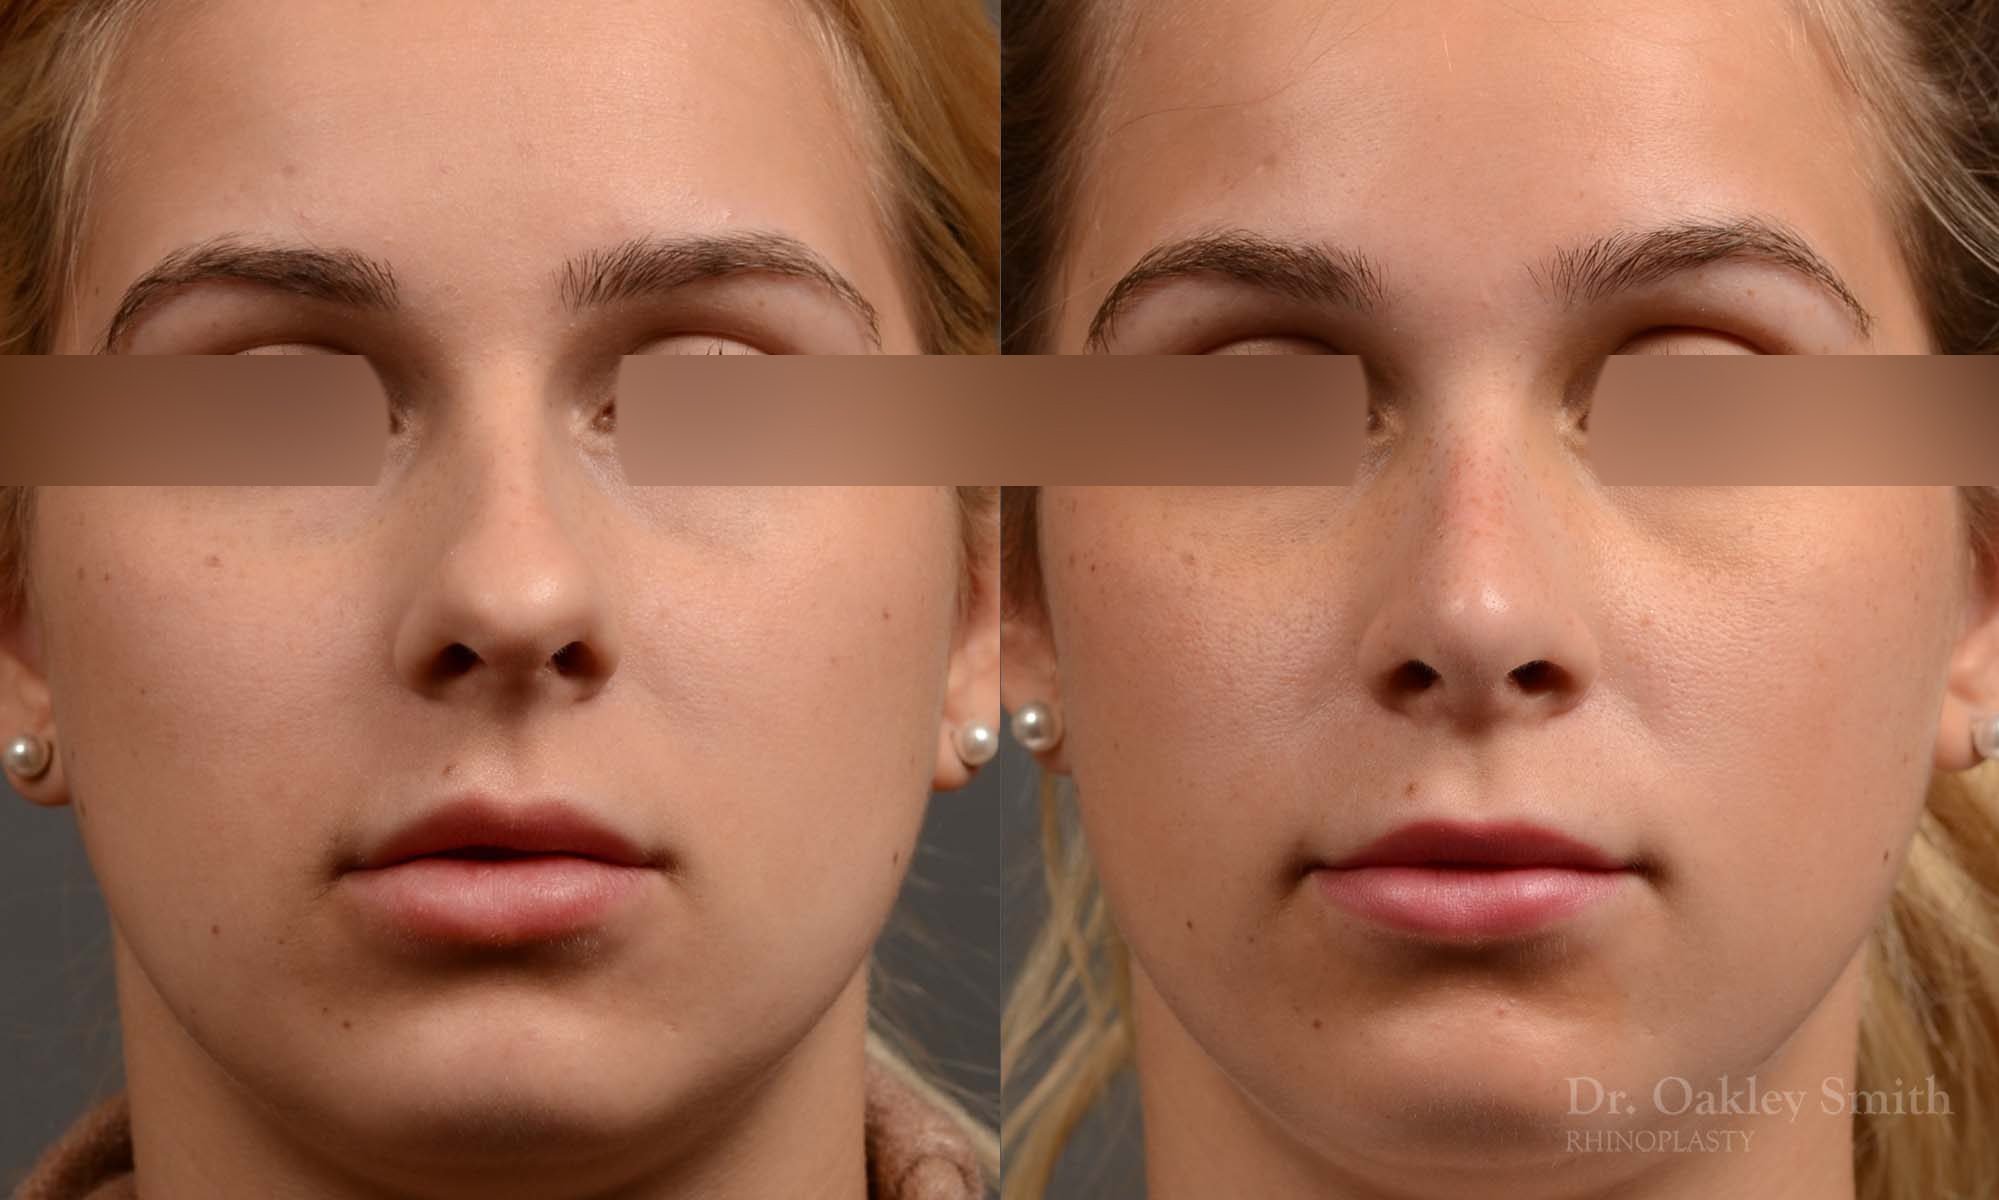 374 rhinoplasty, this woman had revision rhinoplasty to reduce the overall size of her nose.